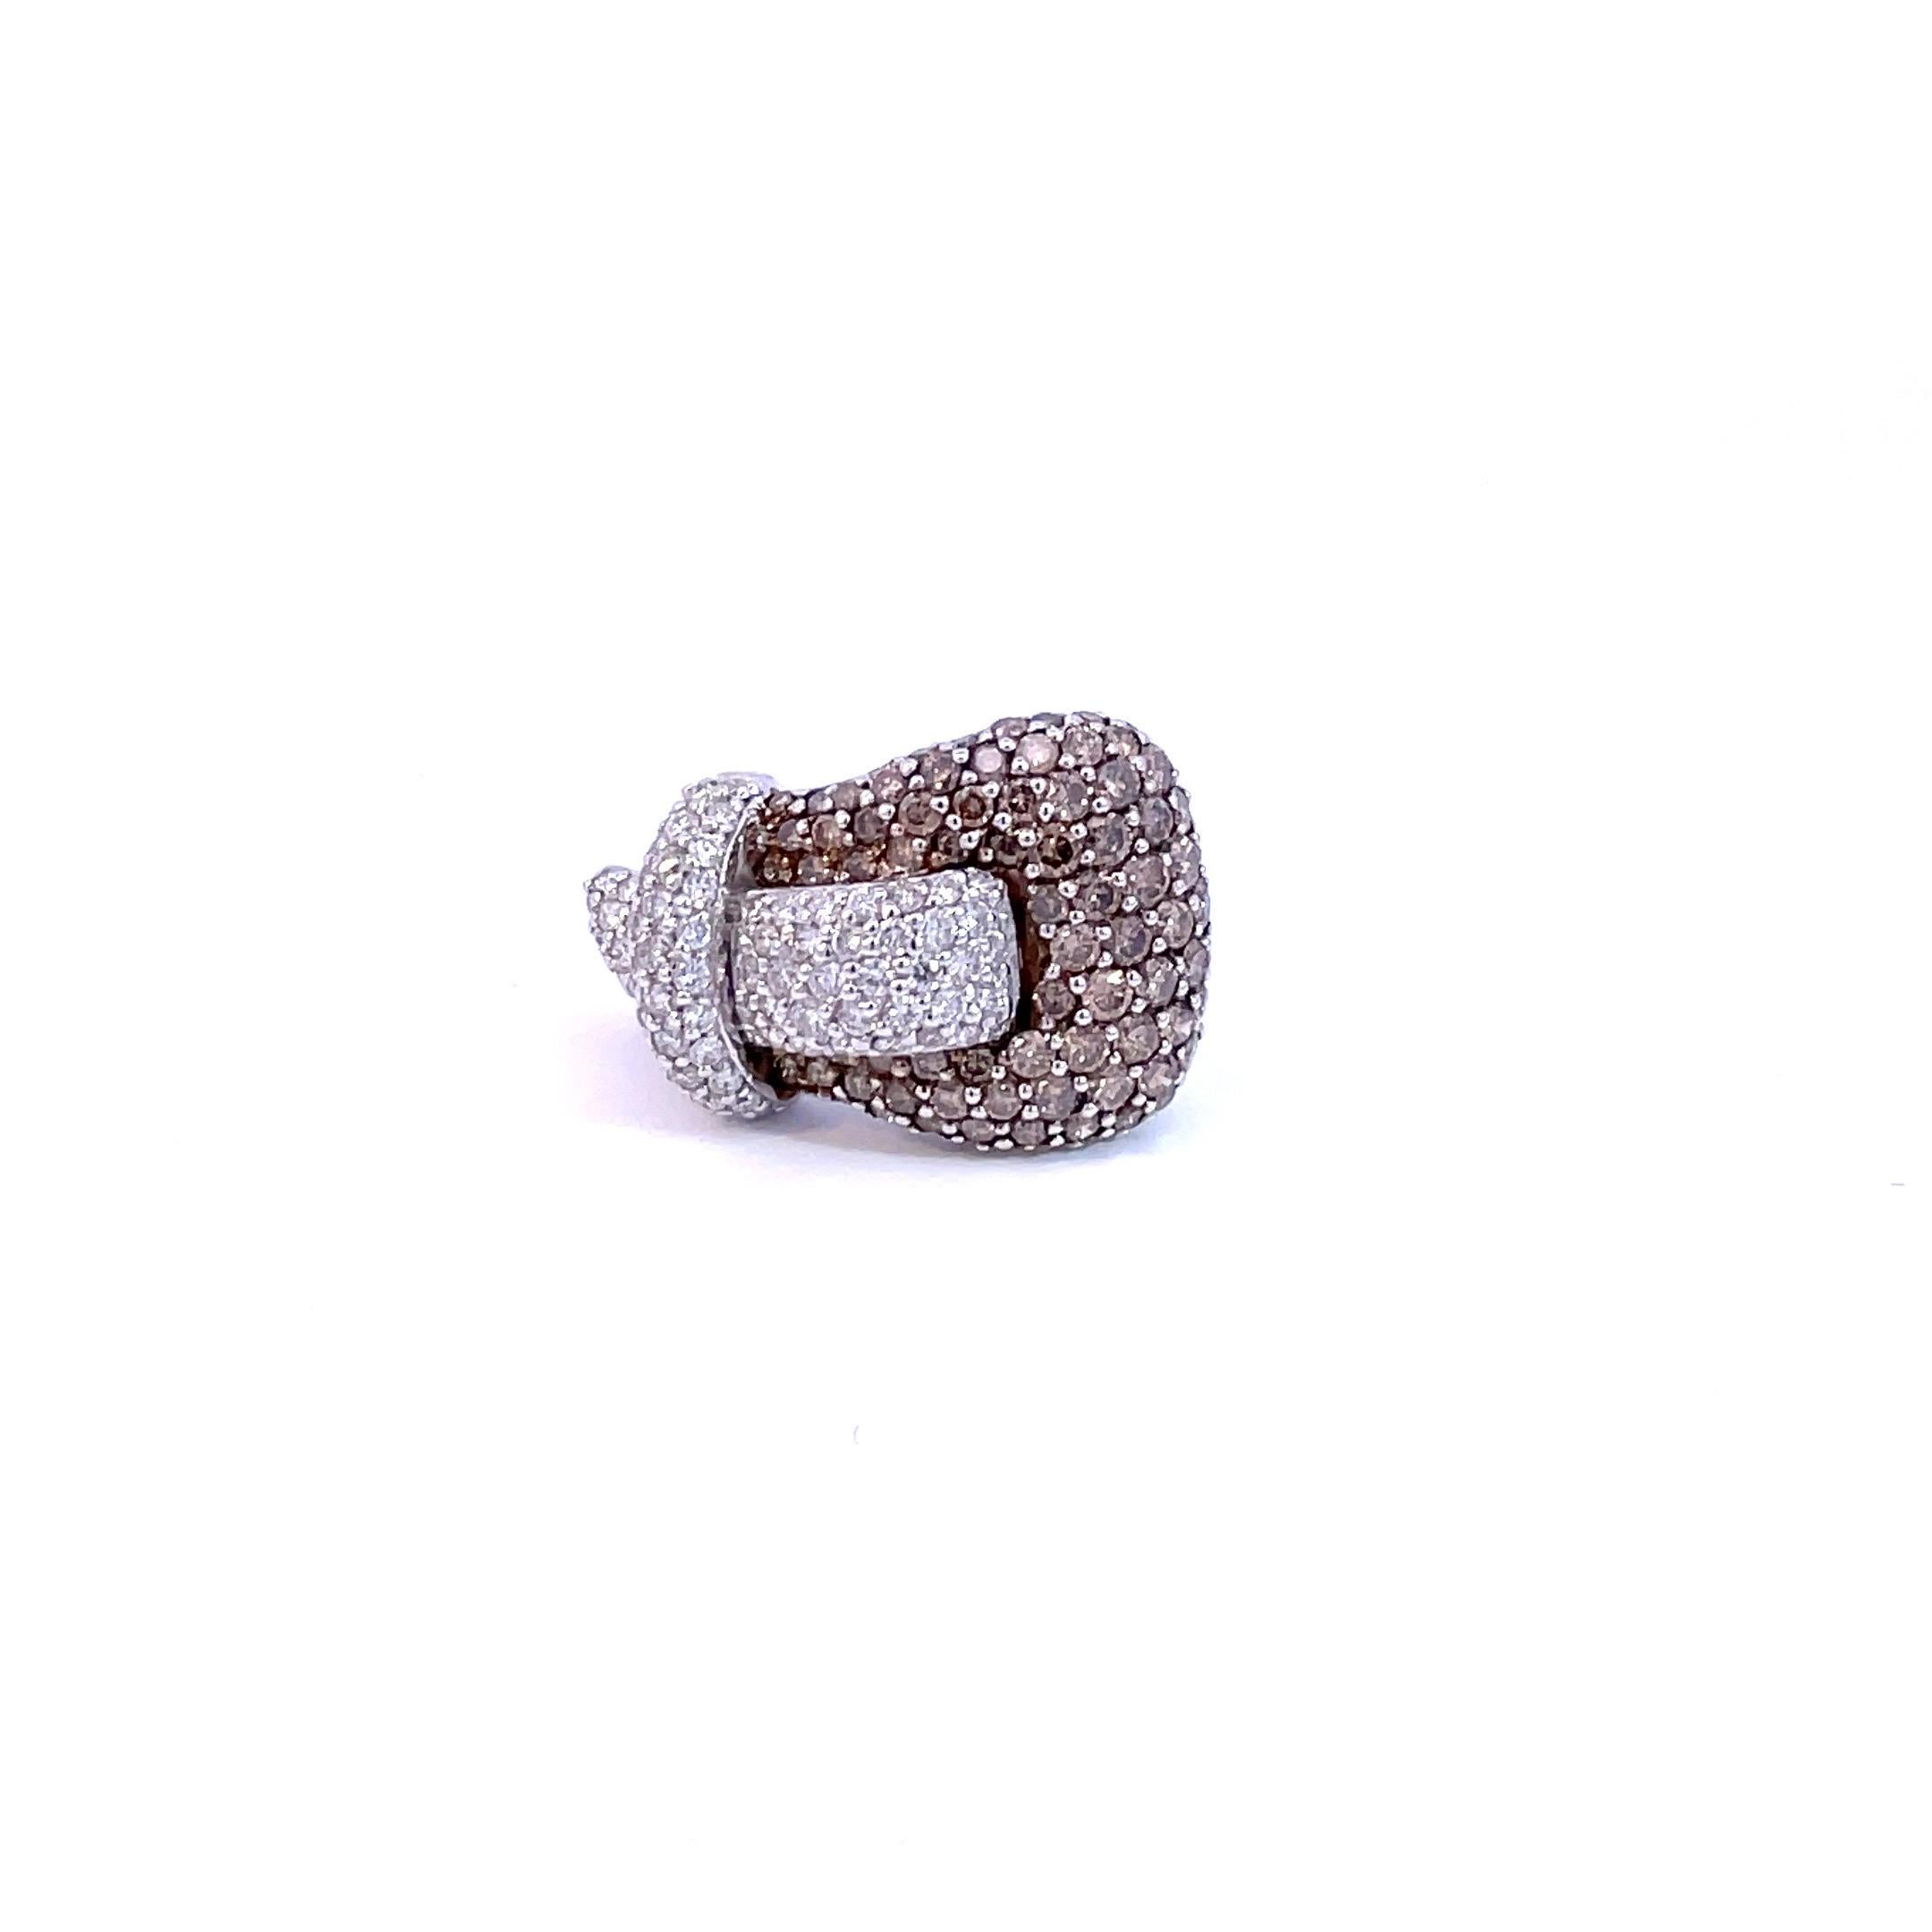 One natural brown diamond & natural white diamond Buckle Ring meticulously set with only the  finest quality brilliant cut diamonds.

98 round cut natural brown diamonds weighing 2.48ct total weight

80 brilliant cut diamonds weighing 0.73ct total